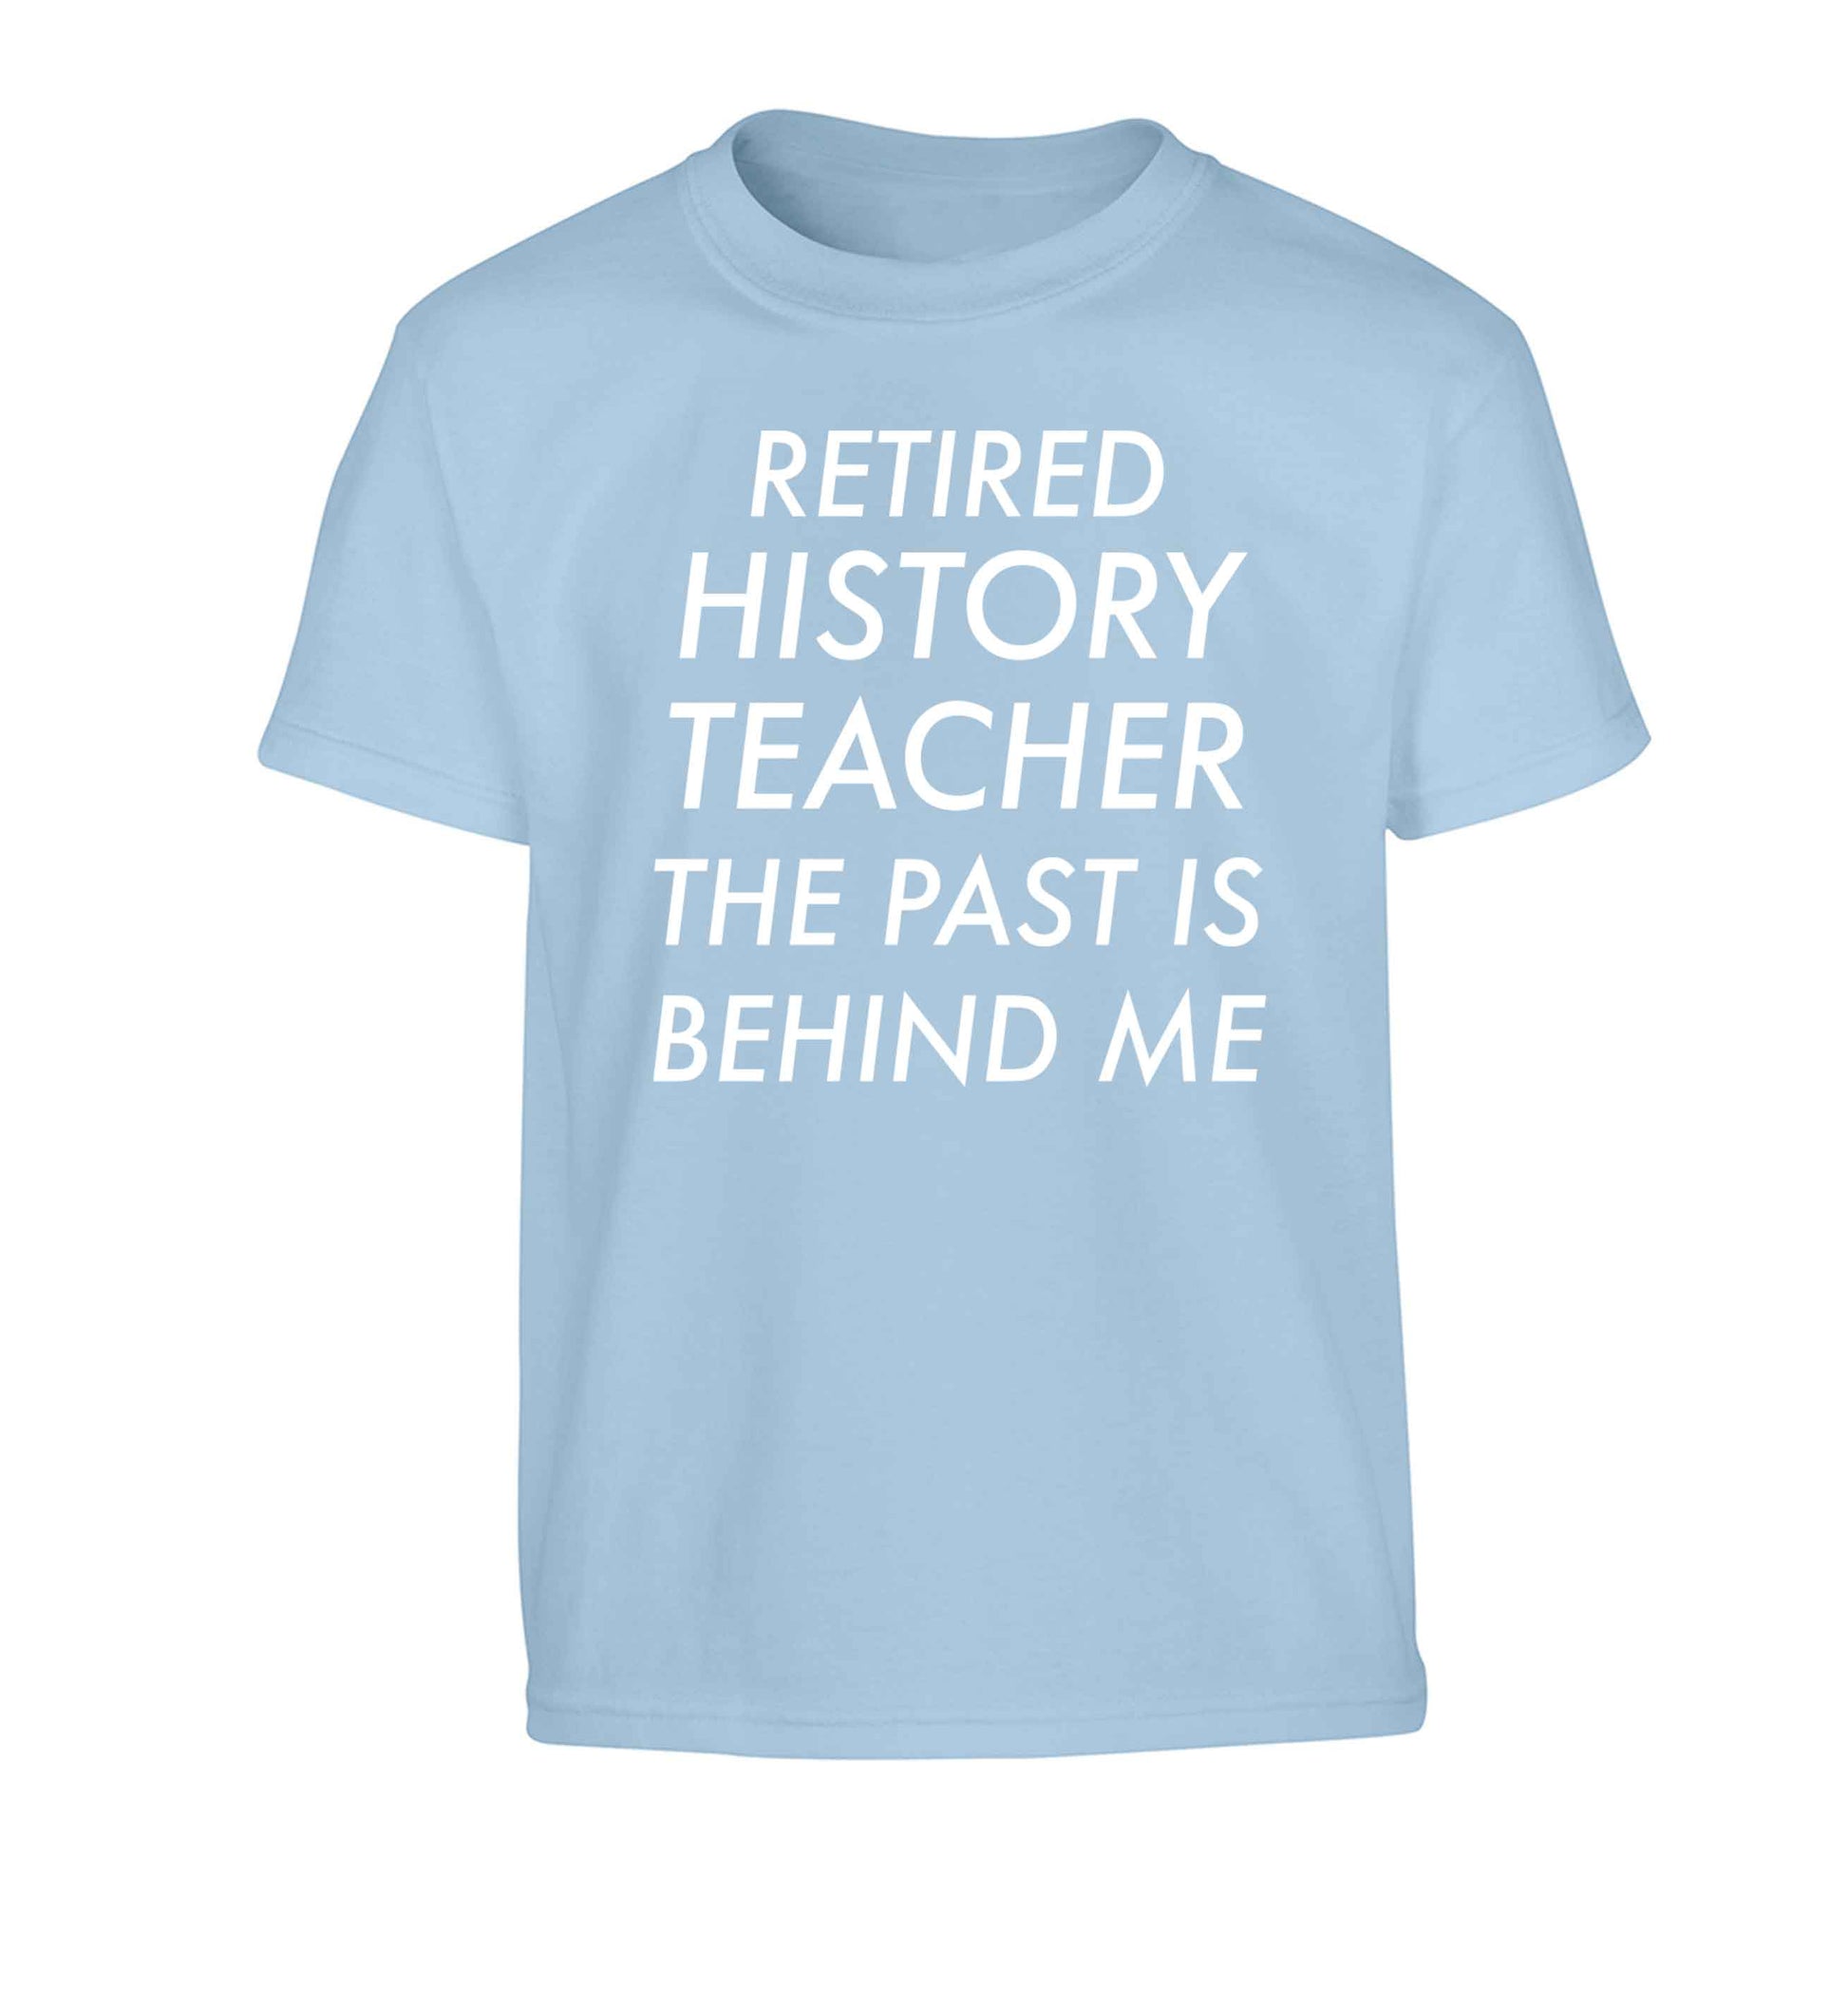 Retired history teacher the past is behind me Children's light blue Tshirt 12-13 Years